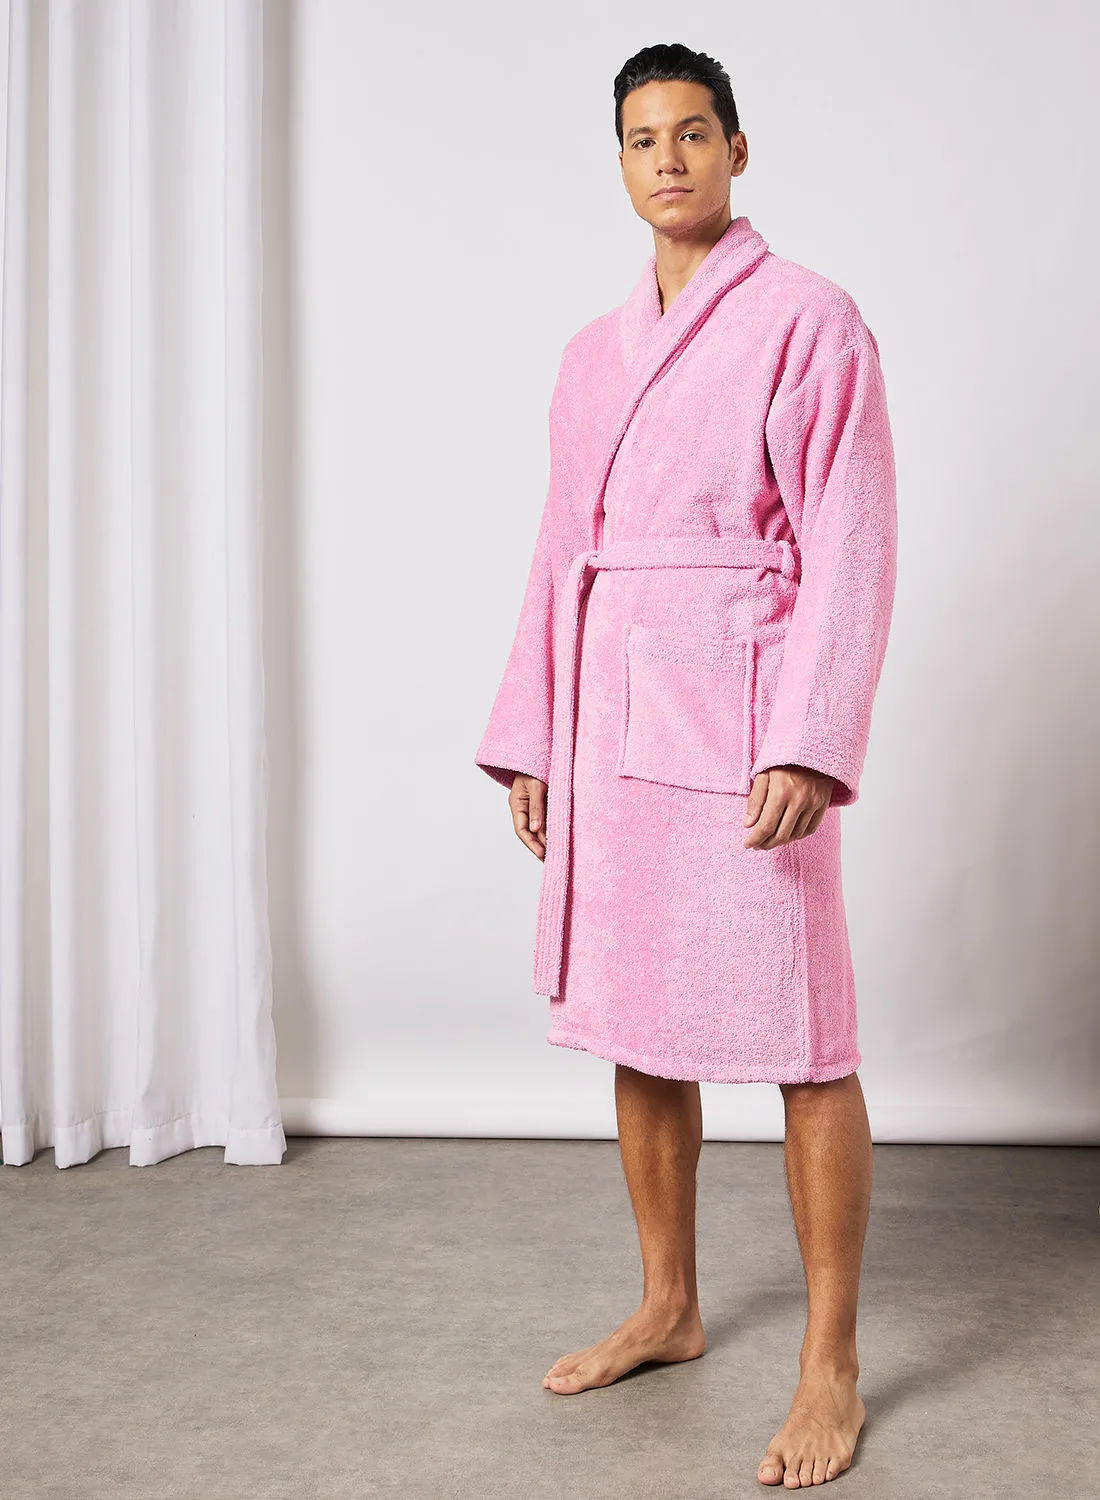 noon east Bathrobe - 400 GSM 100% Cotton Terry Silky Soft Spa Quality Comfort - Shawl Collar & Pocket - Pink Color - 1 Piece